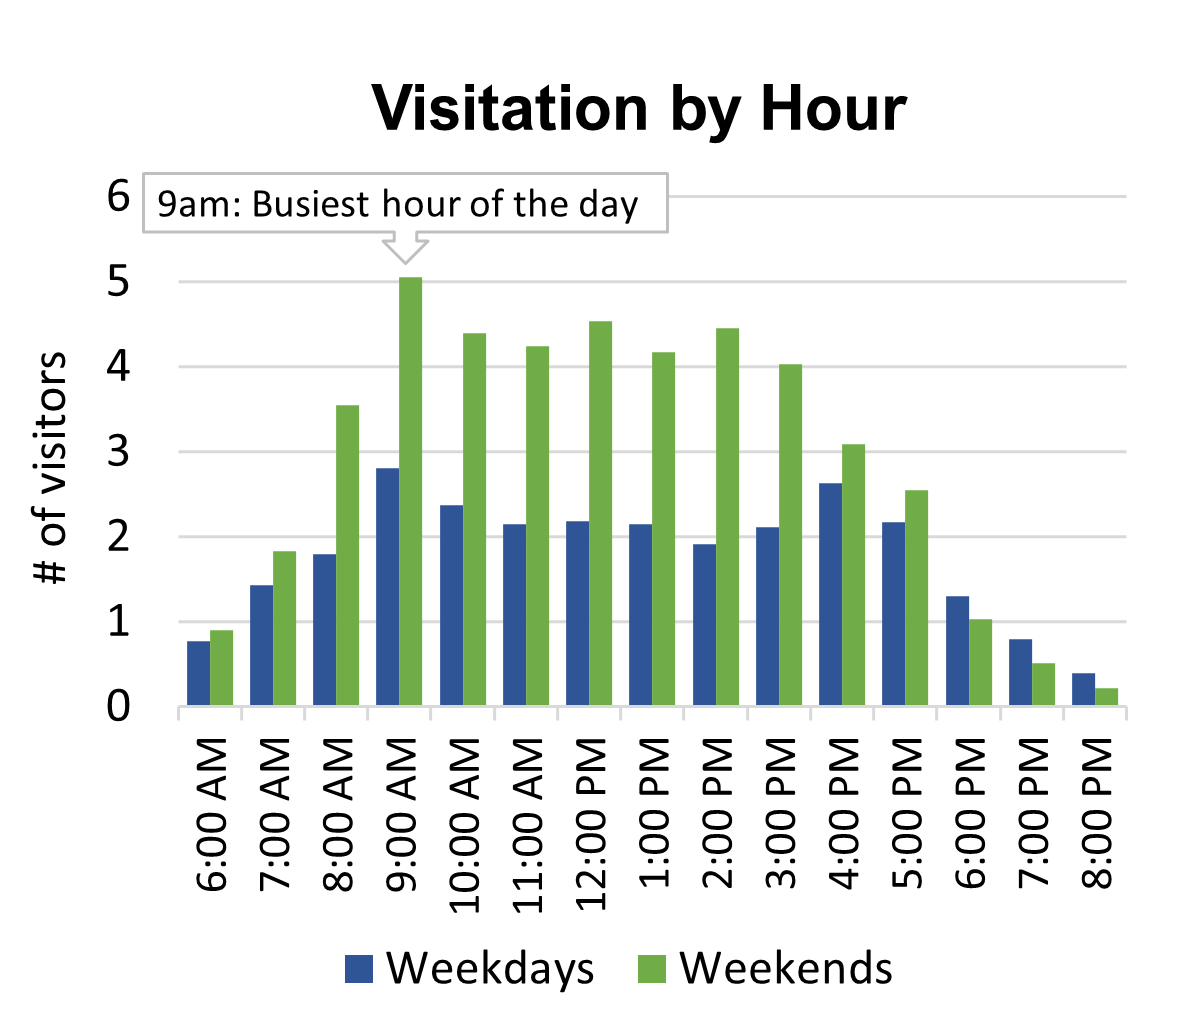 Bar chart showing 9am is the busiest hour of the day